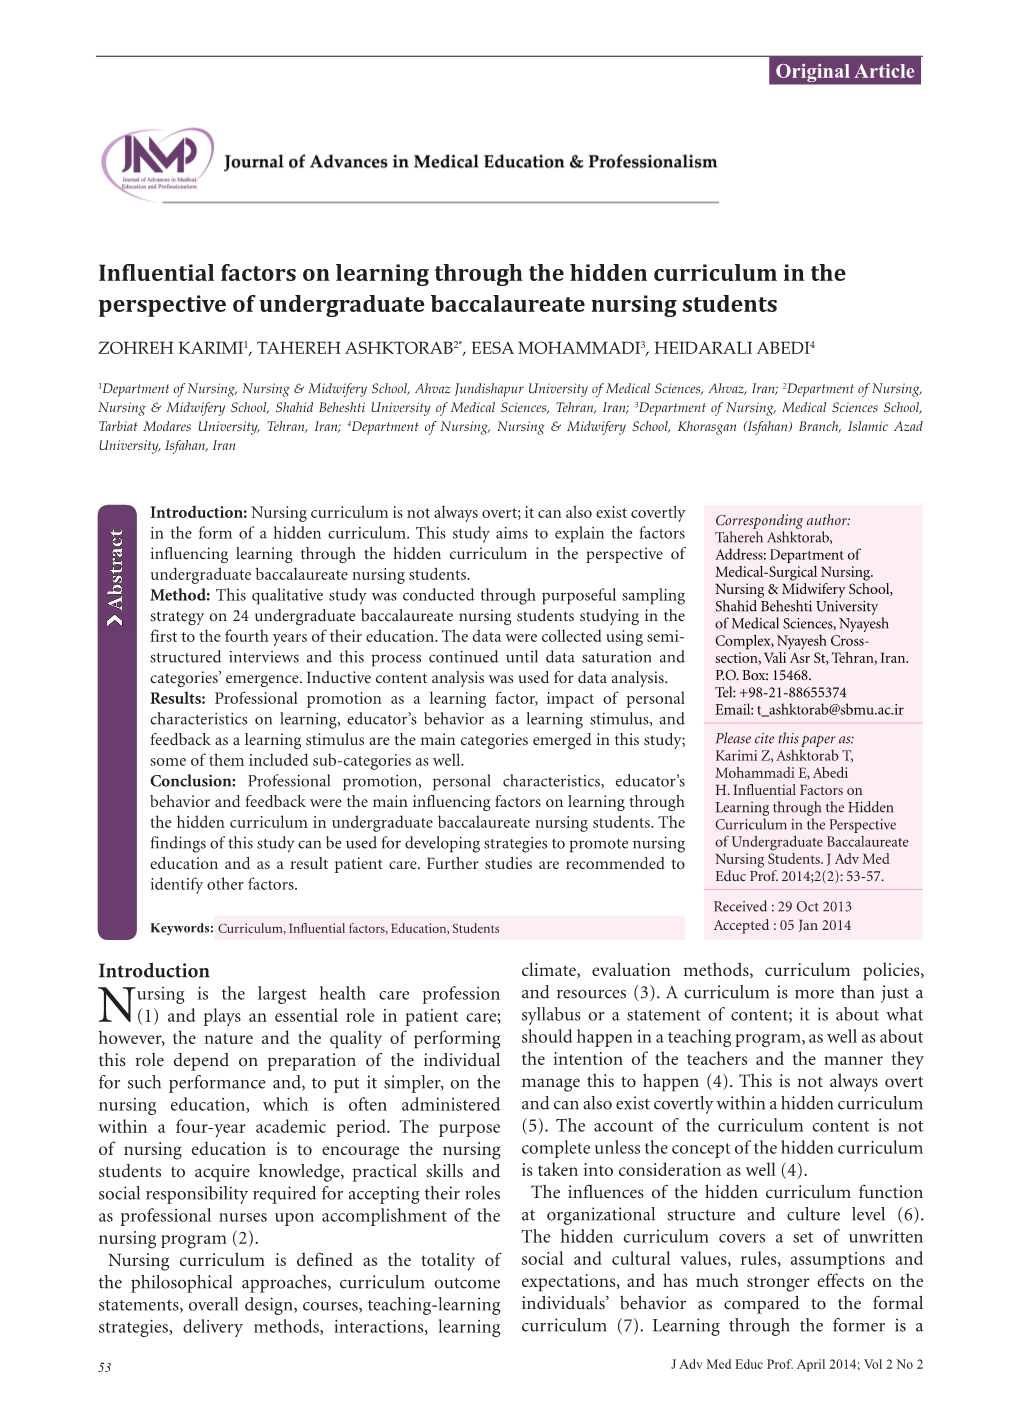 Influential Factors on Learning Through the Hidden Curriculum in the Perspective of Undergraduate Baccalaureate Nursing Students